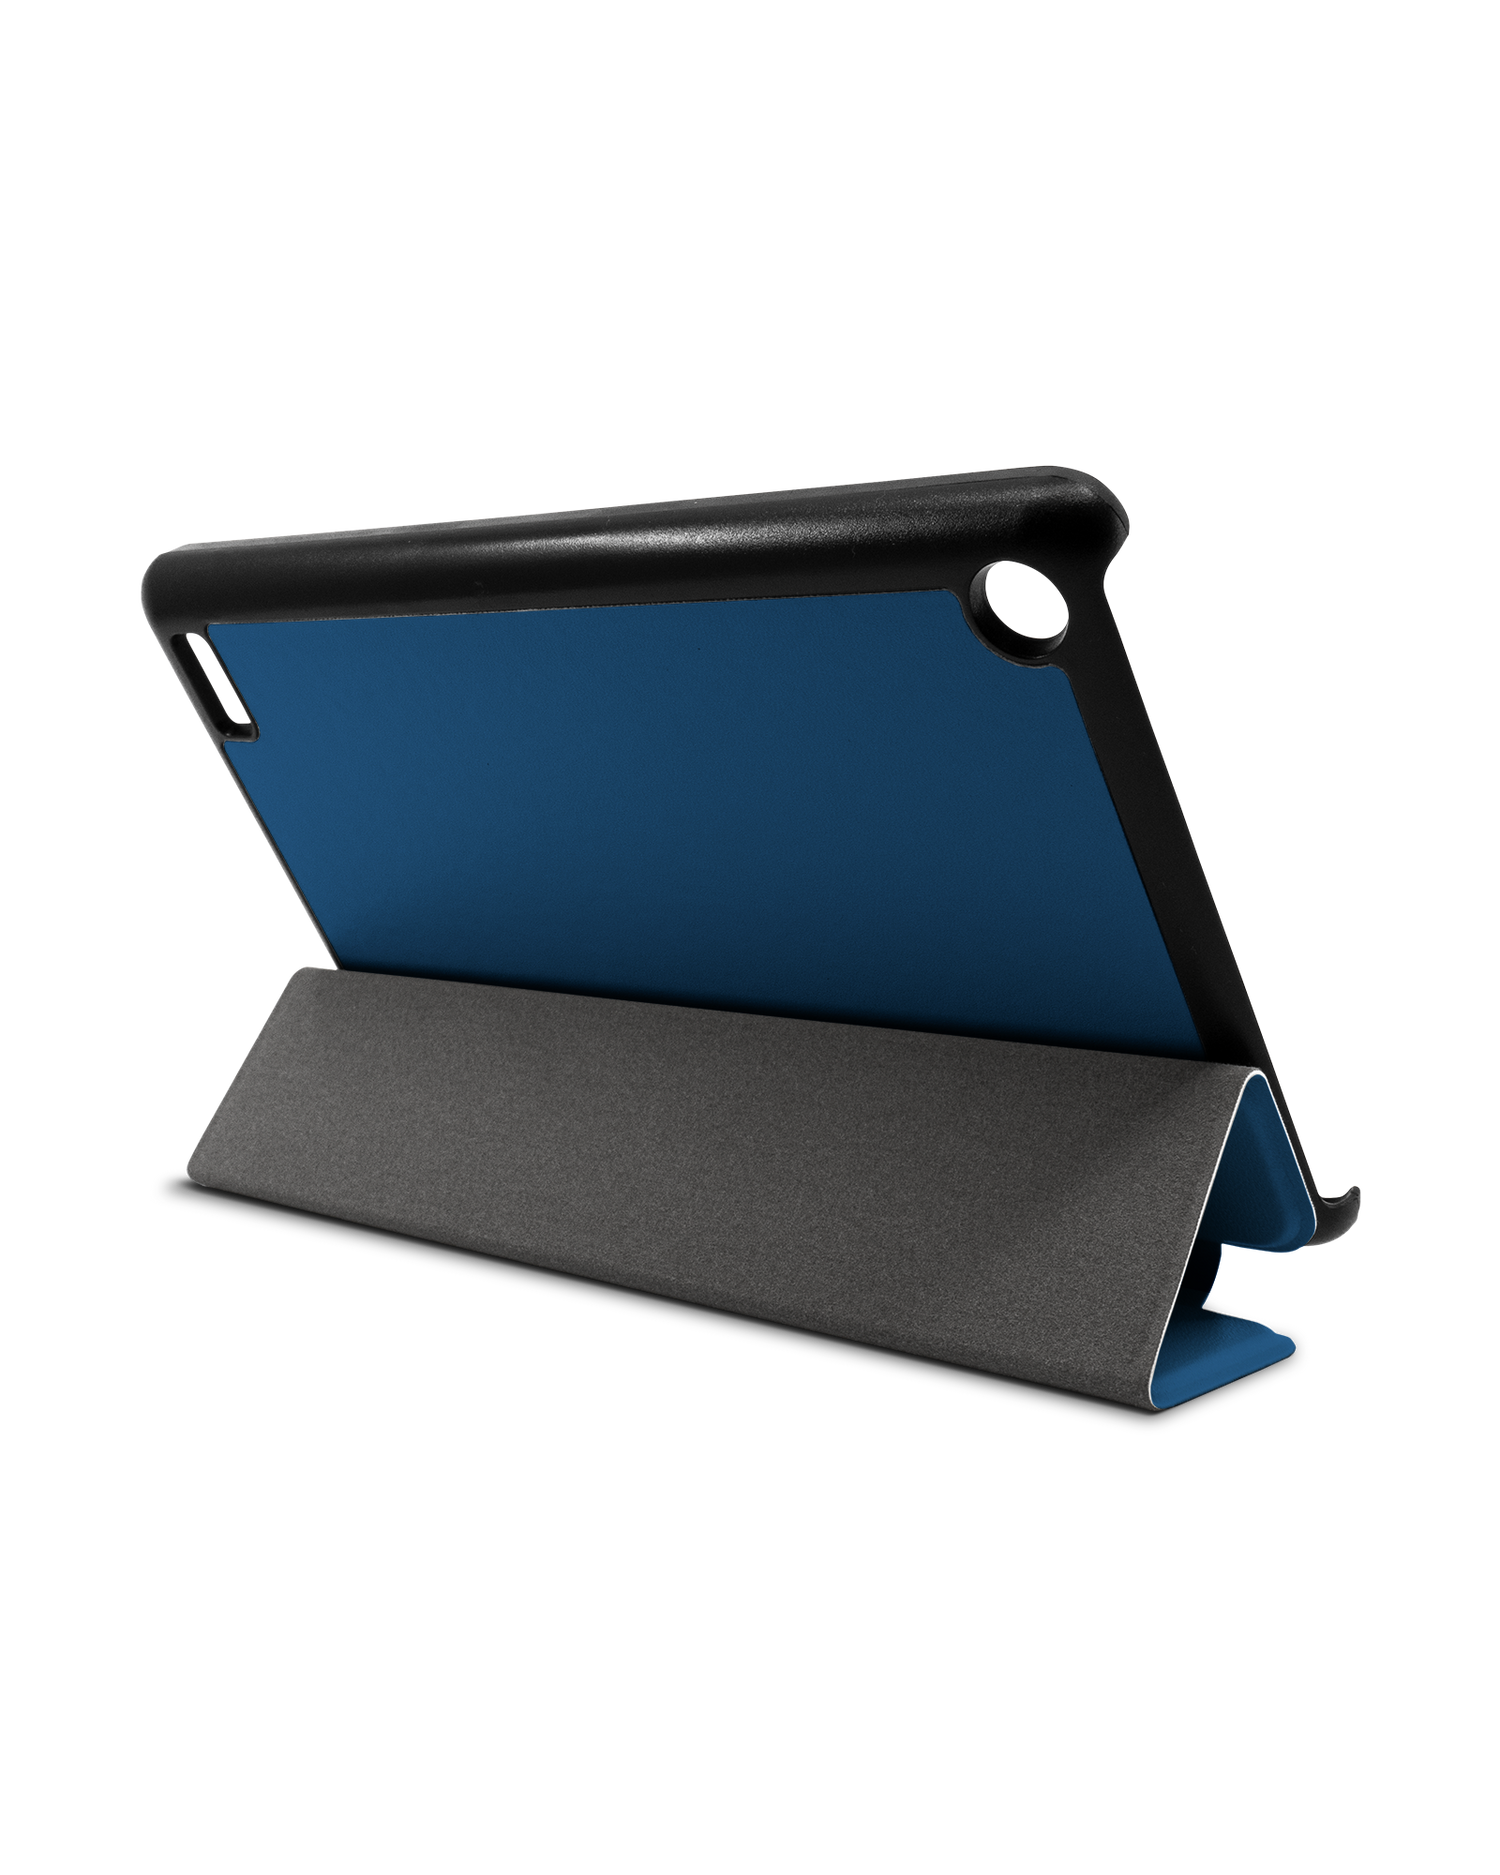 CLASSIC BLUE Tablet Smart Case for Amazon Fire 7: Used as Stand